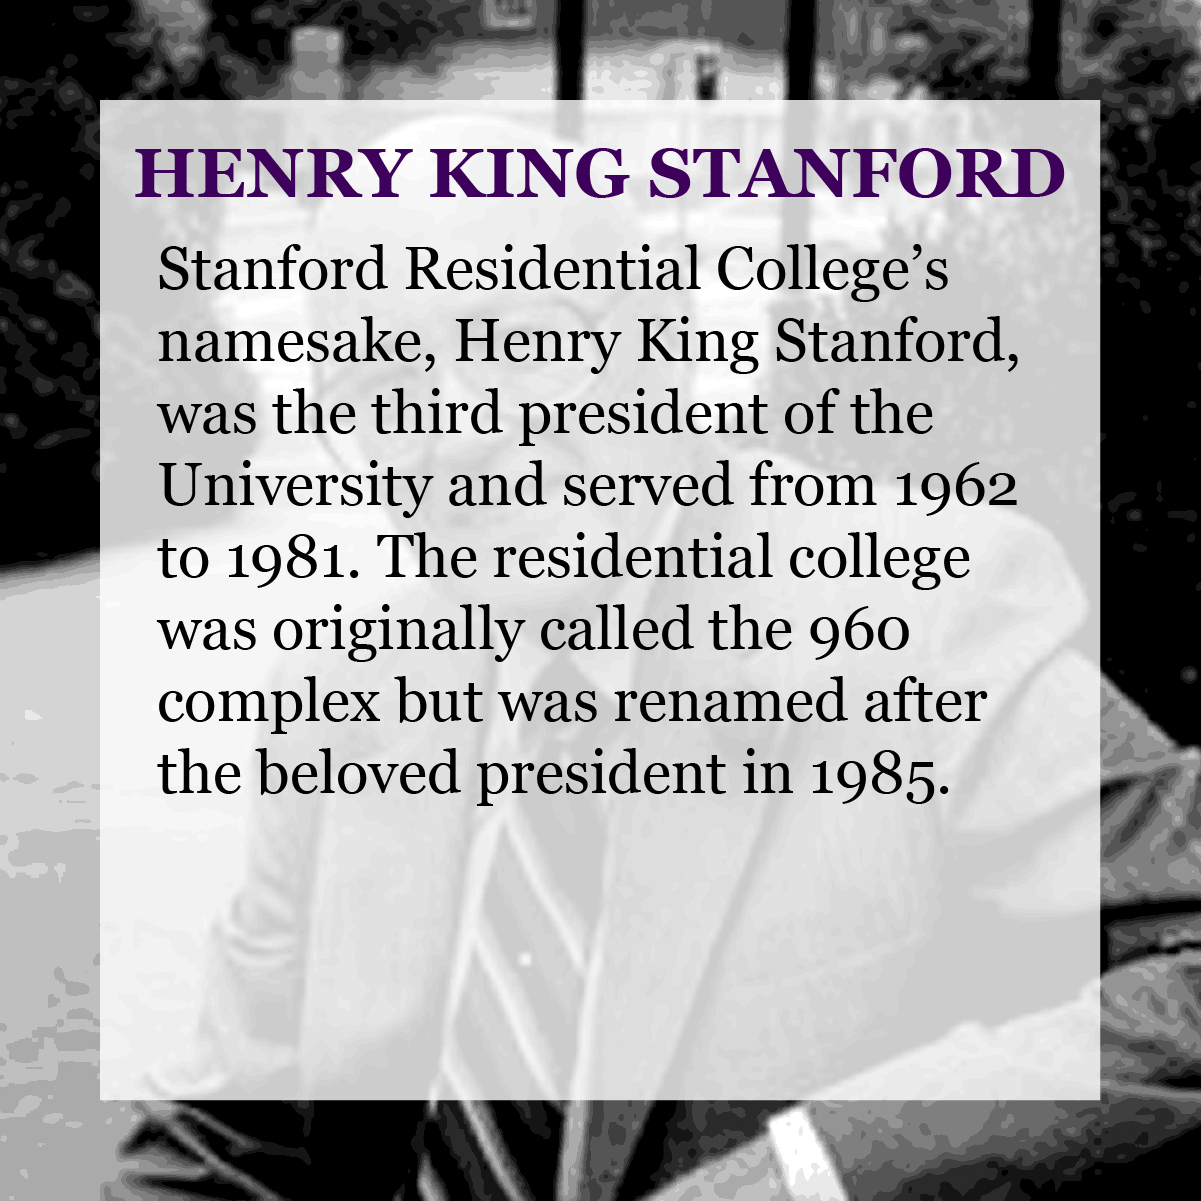 Text: Henry King Stanford - Stanford Residential College’s namesake, Henry King Stanford, was the third president of the University and served from 1962 to 1981. The residential college was originally called the 960 complex but was renamed after the beloved president in 1985.